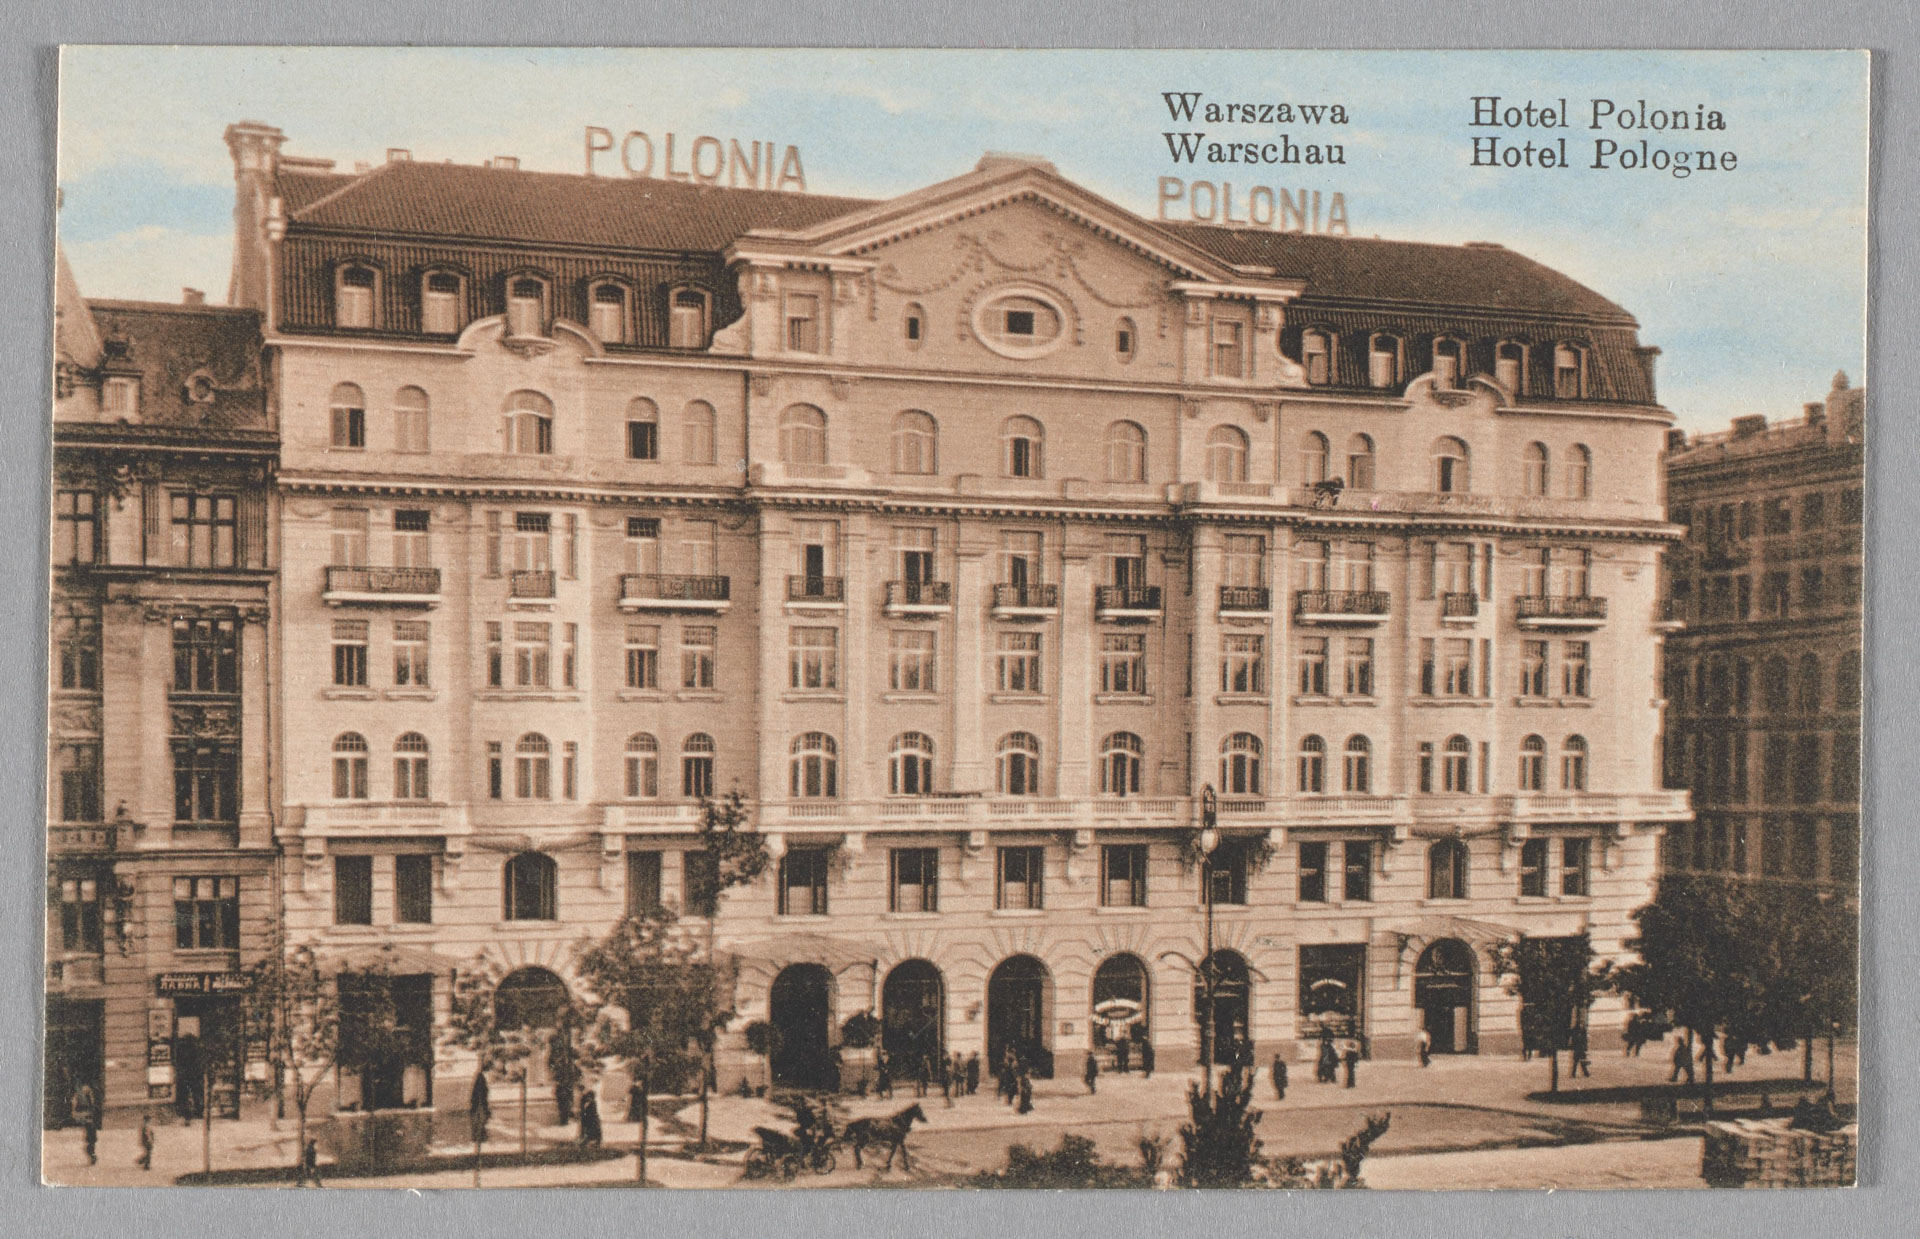 Polonia Palace Hotel,  around 1915‑1918,  postcard,  property of the Museum of Warsaw